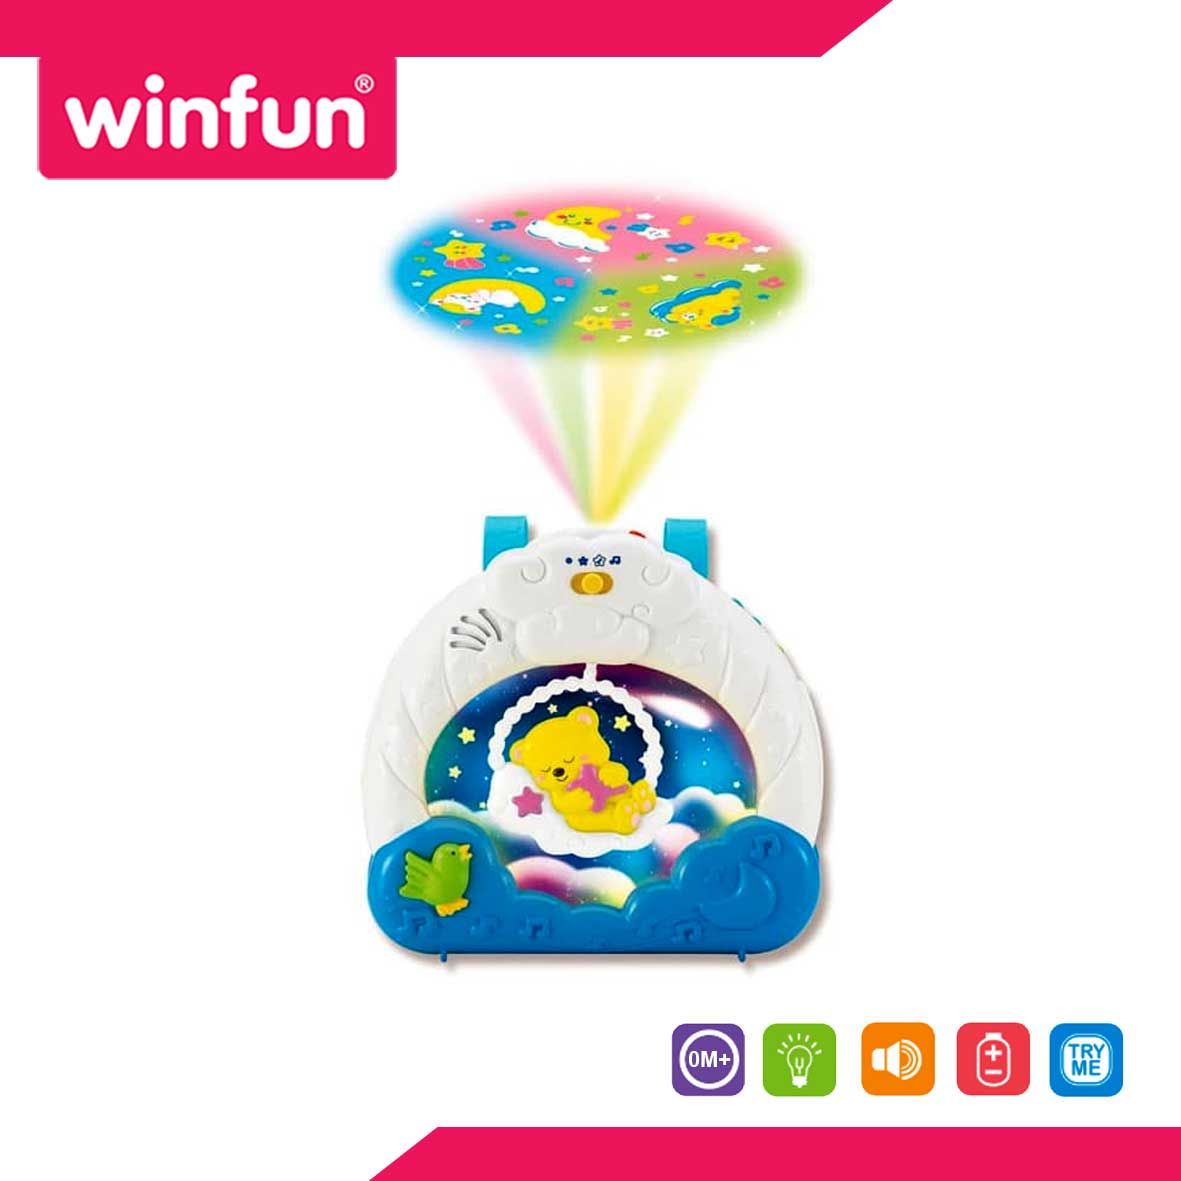 Winfun Lullaby Dreams Soothing Projector - 2